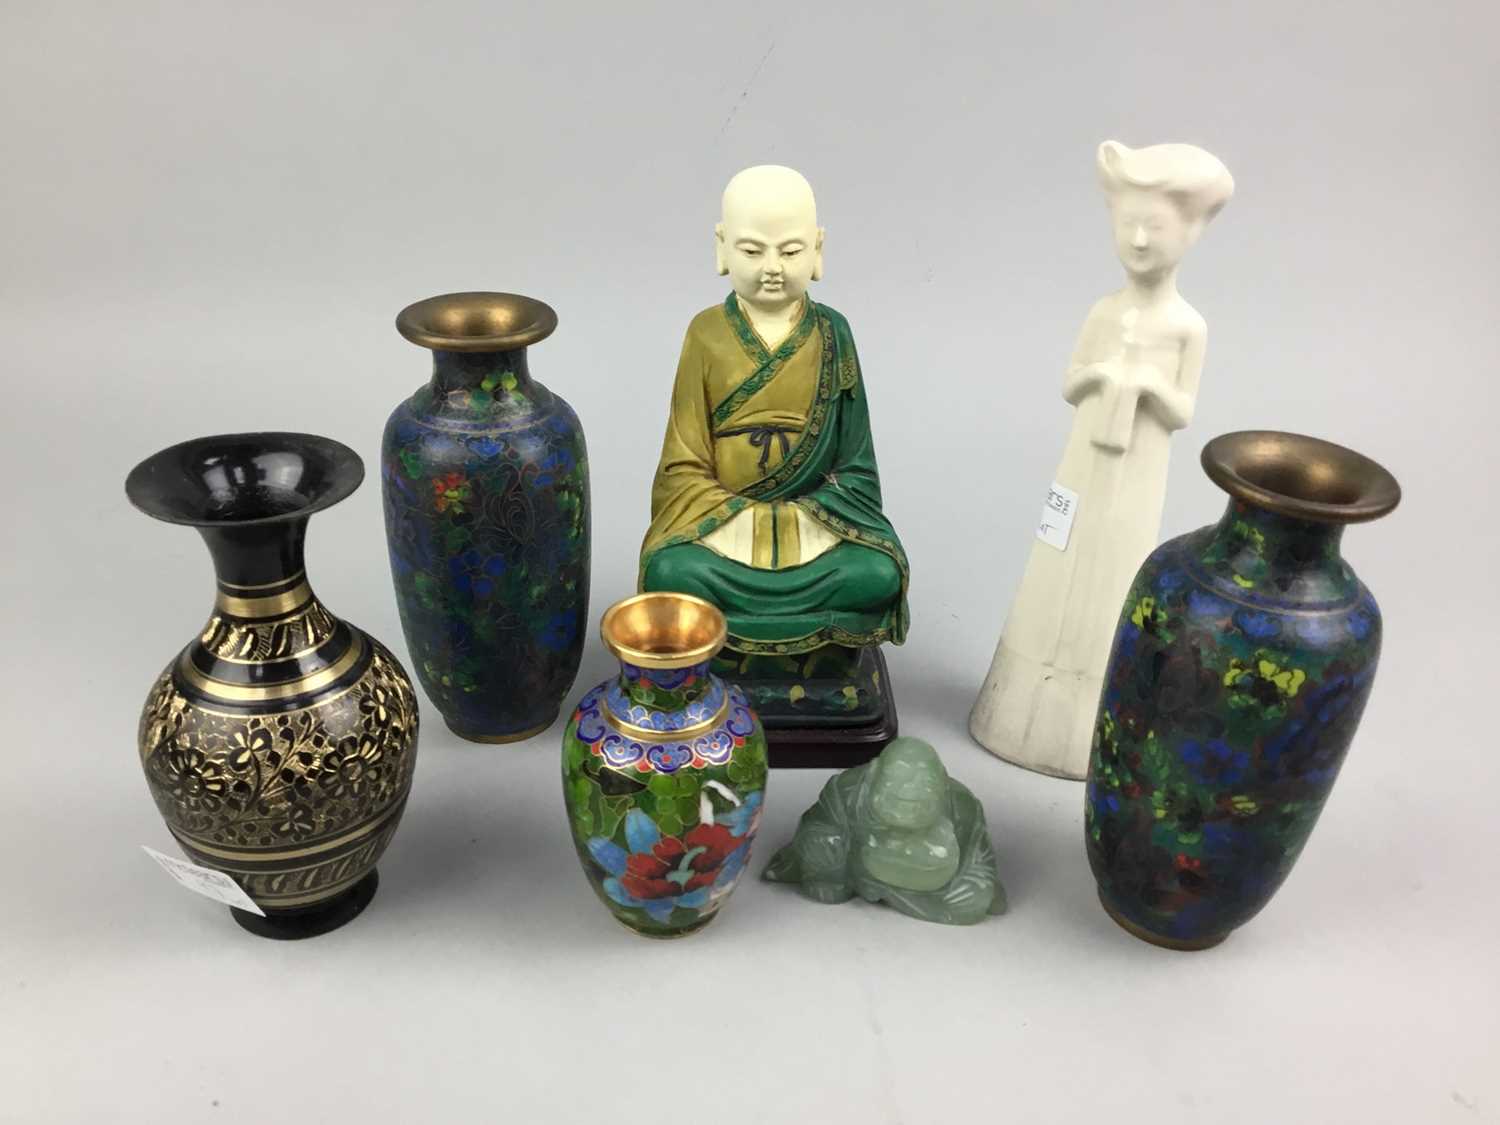 Lot 97 - A LOT OF THREE CLOISONNE ENAMEL VASES ALONG WITH OTHER ITEMS